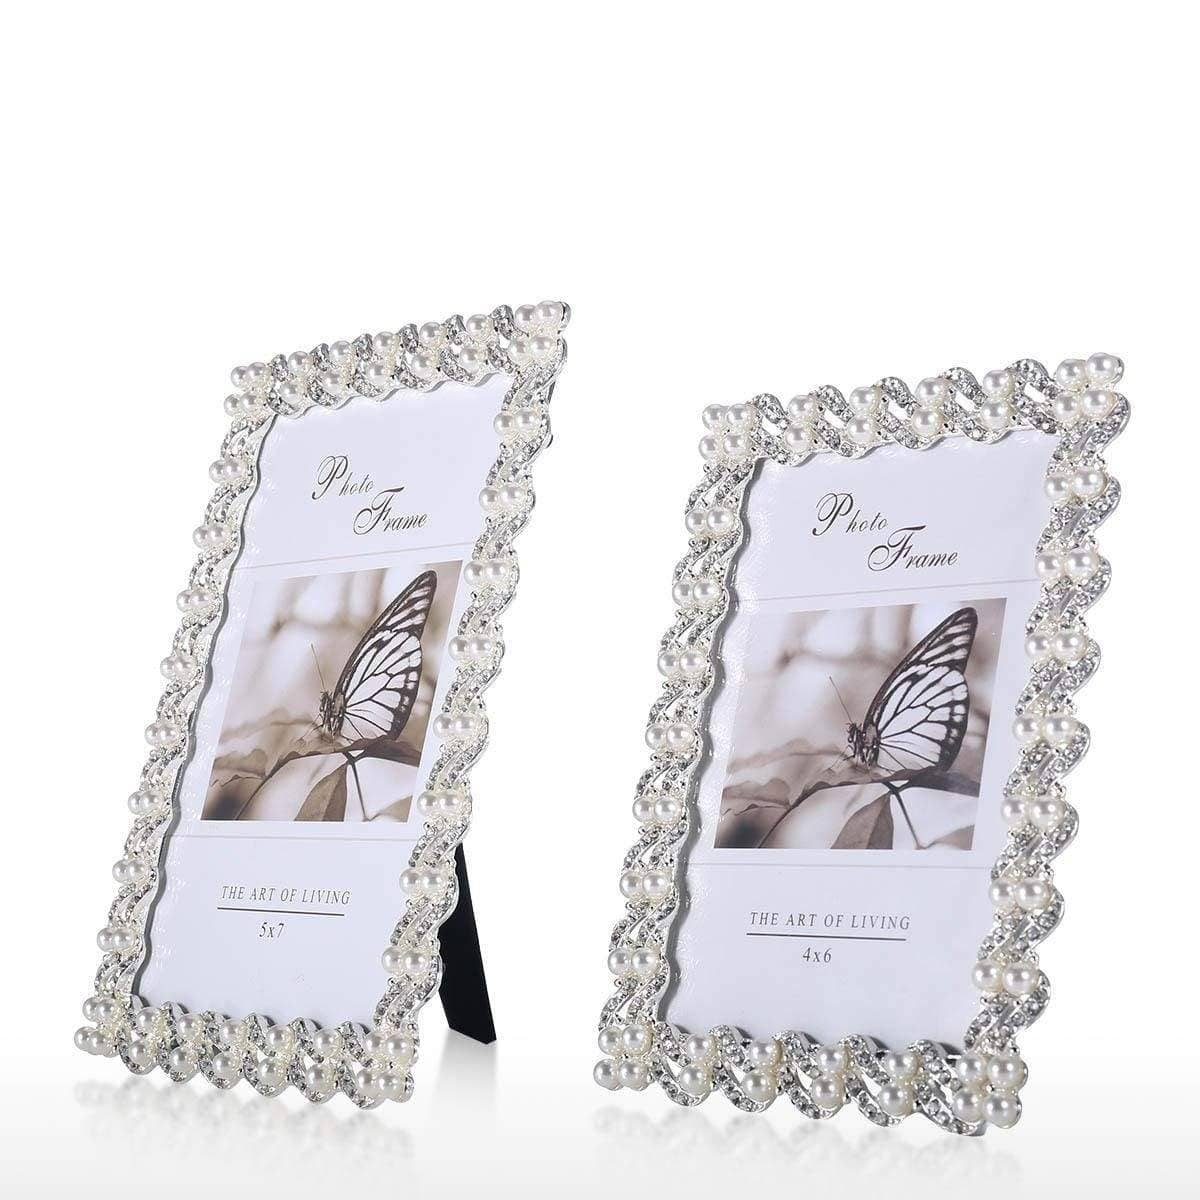 Synthetic Diamond Photo Picture Frame: Stylish and Elegant Home Decor